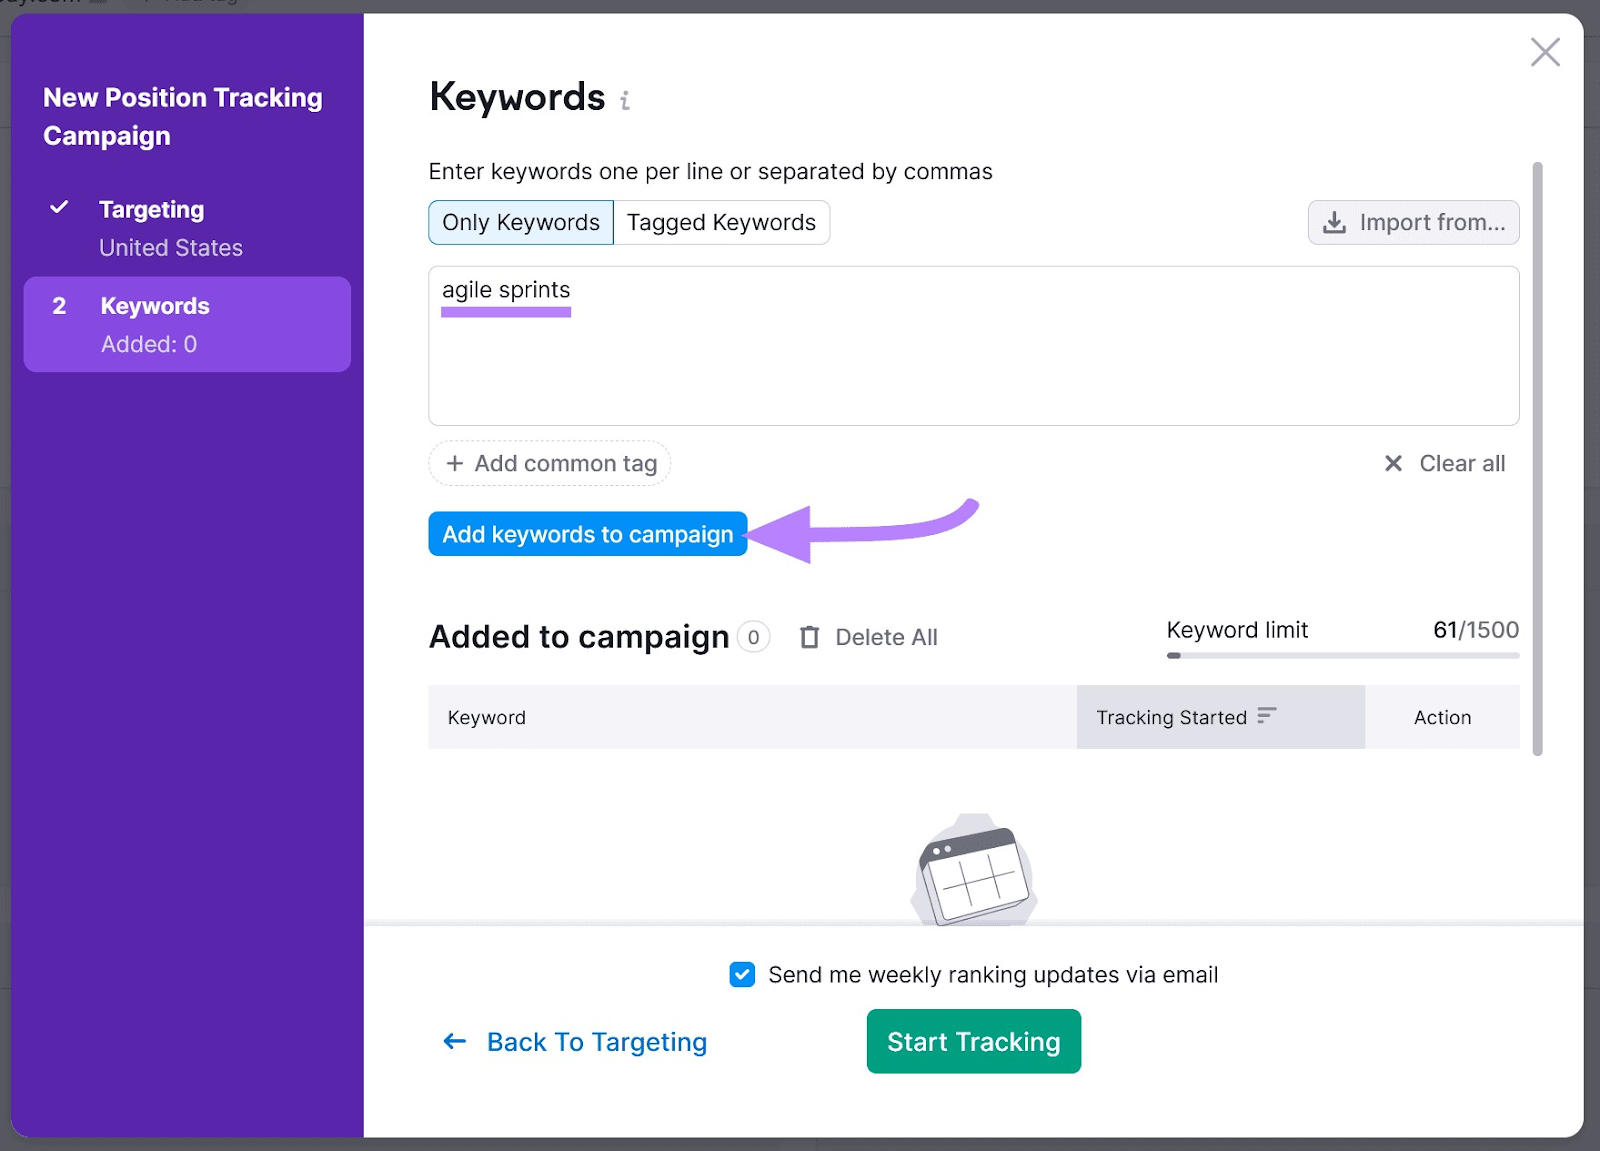 "agile sprints" added to "Keywords" screen in Position Tracking Settings